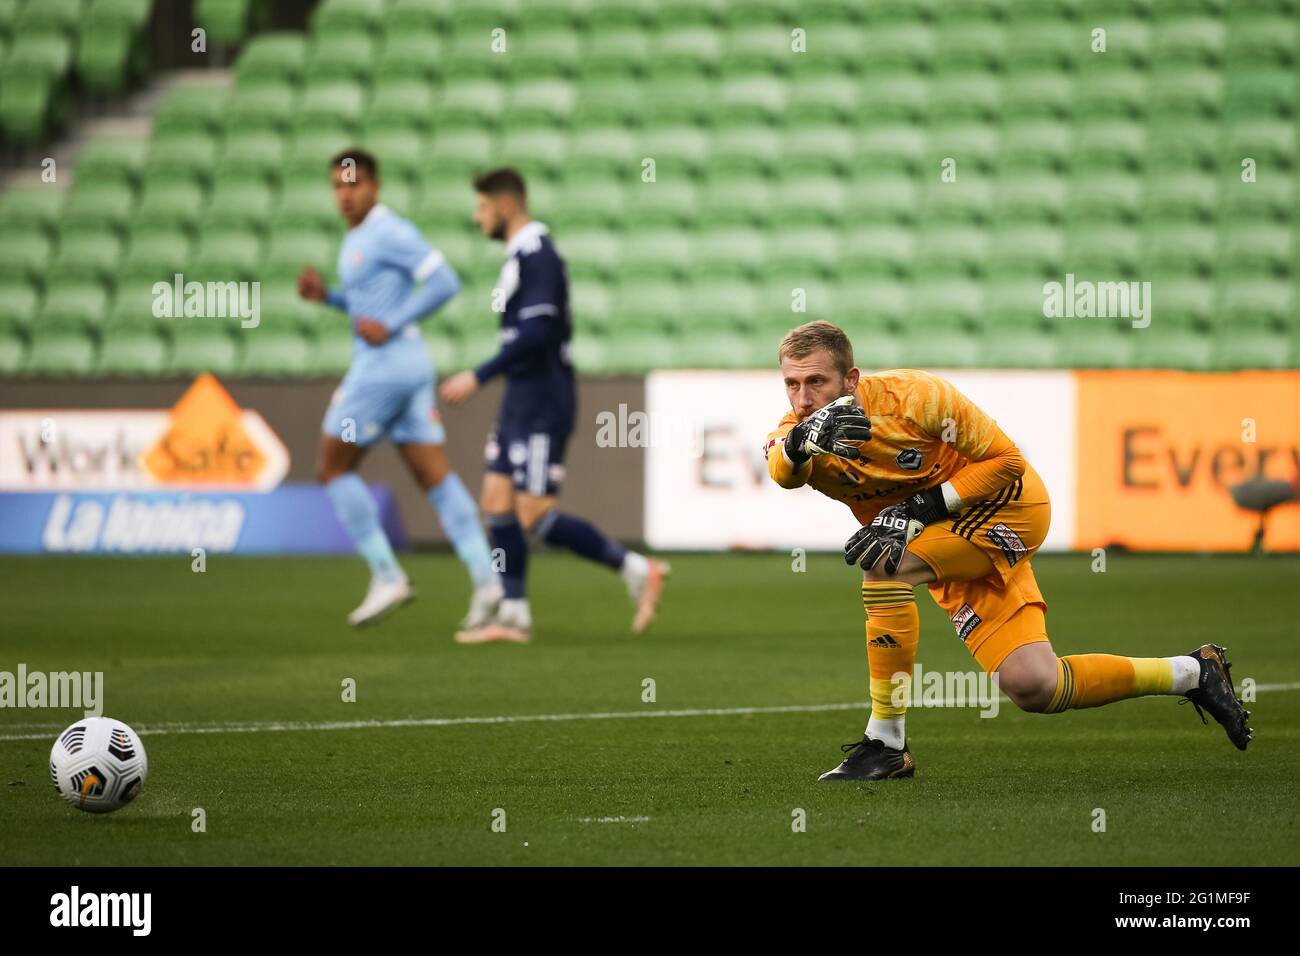 Melbourne, Australia, 6 June, 2021. Matt Acton of Melbourne Victory throws the ball during Round 24 of the Melbourne Victory v Melbourne City FC A-League match, Australia. Credit: Dave Hewison/Alamy Live News Stock Photo